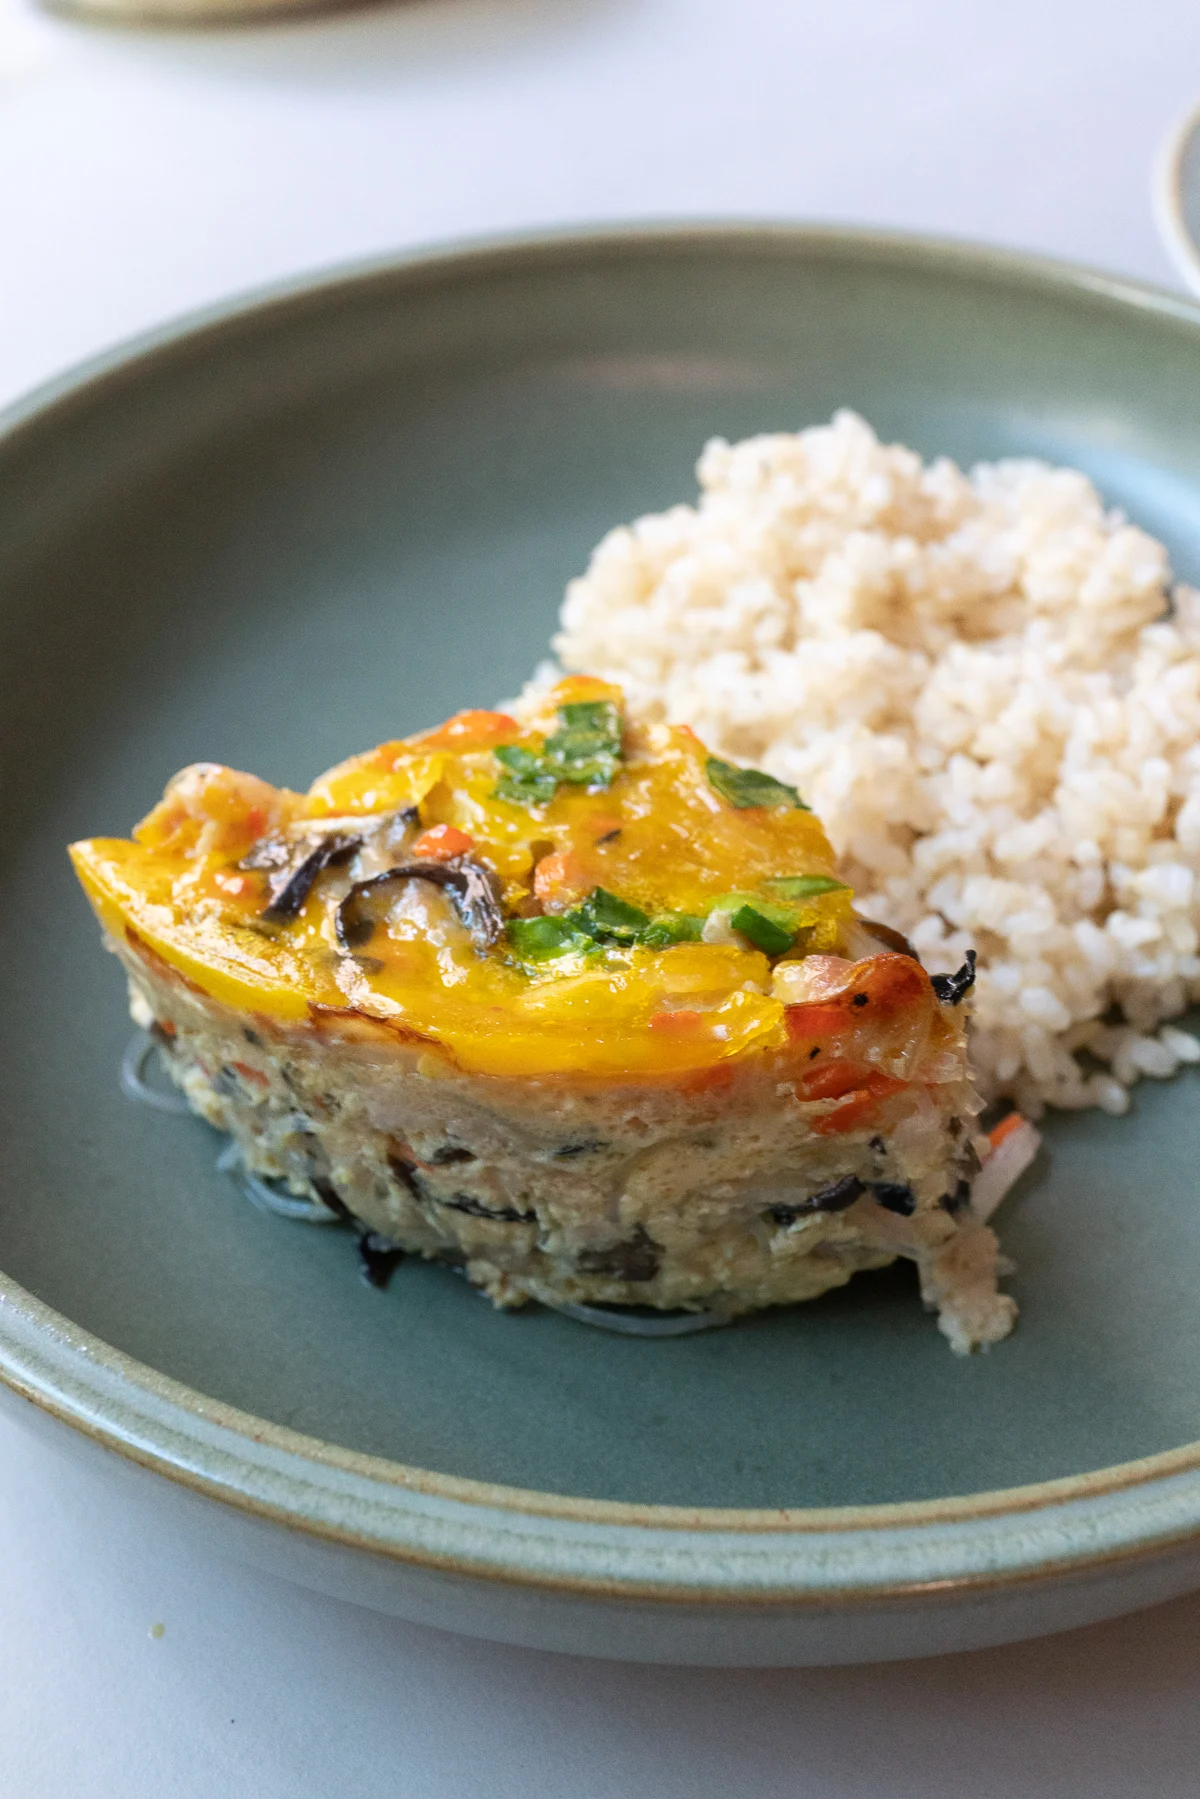 Wedge of baked Vietnamese Egg Meatloaf (Cha Trung) served with rice.